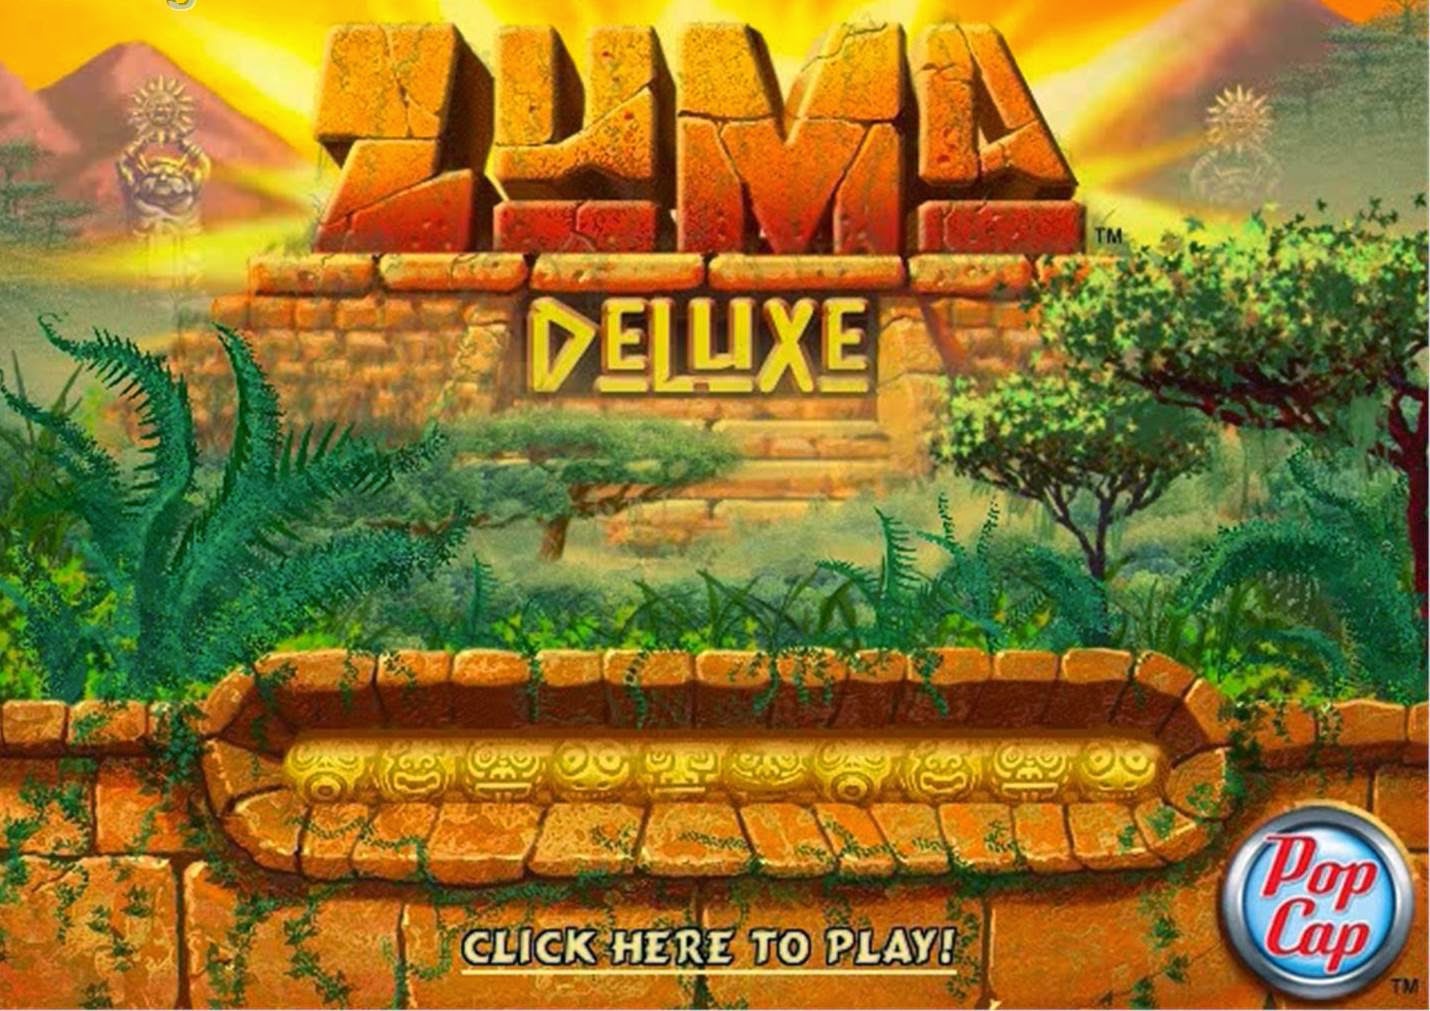 zuma deluxe download free full version